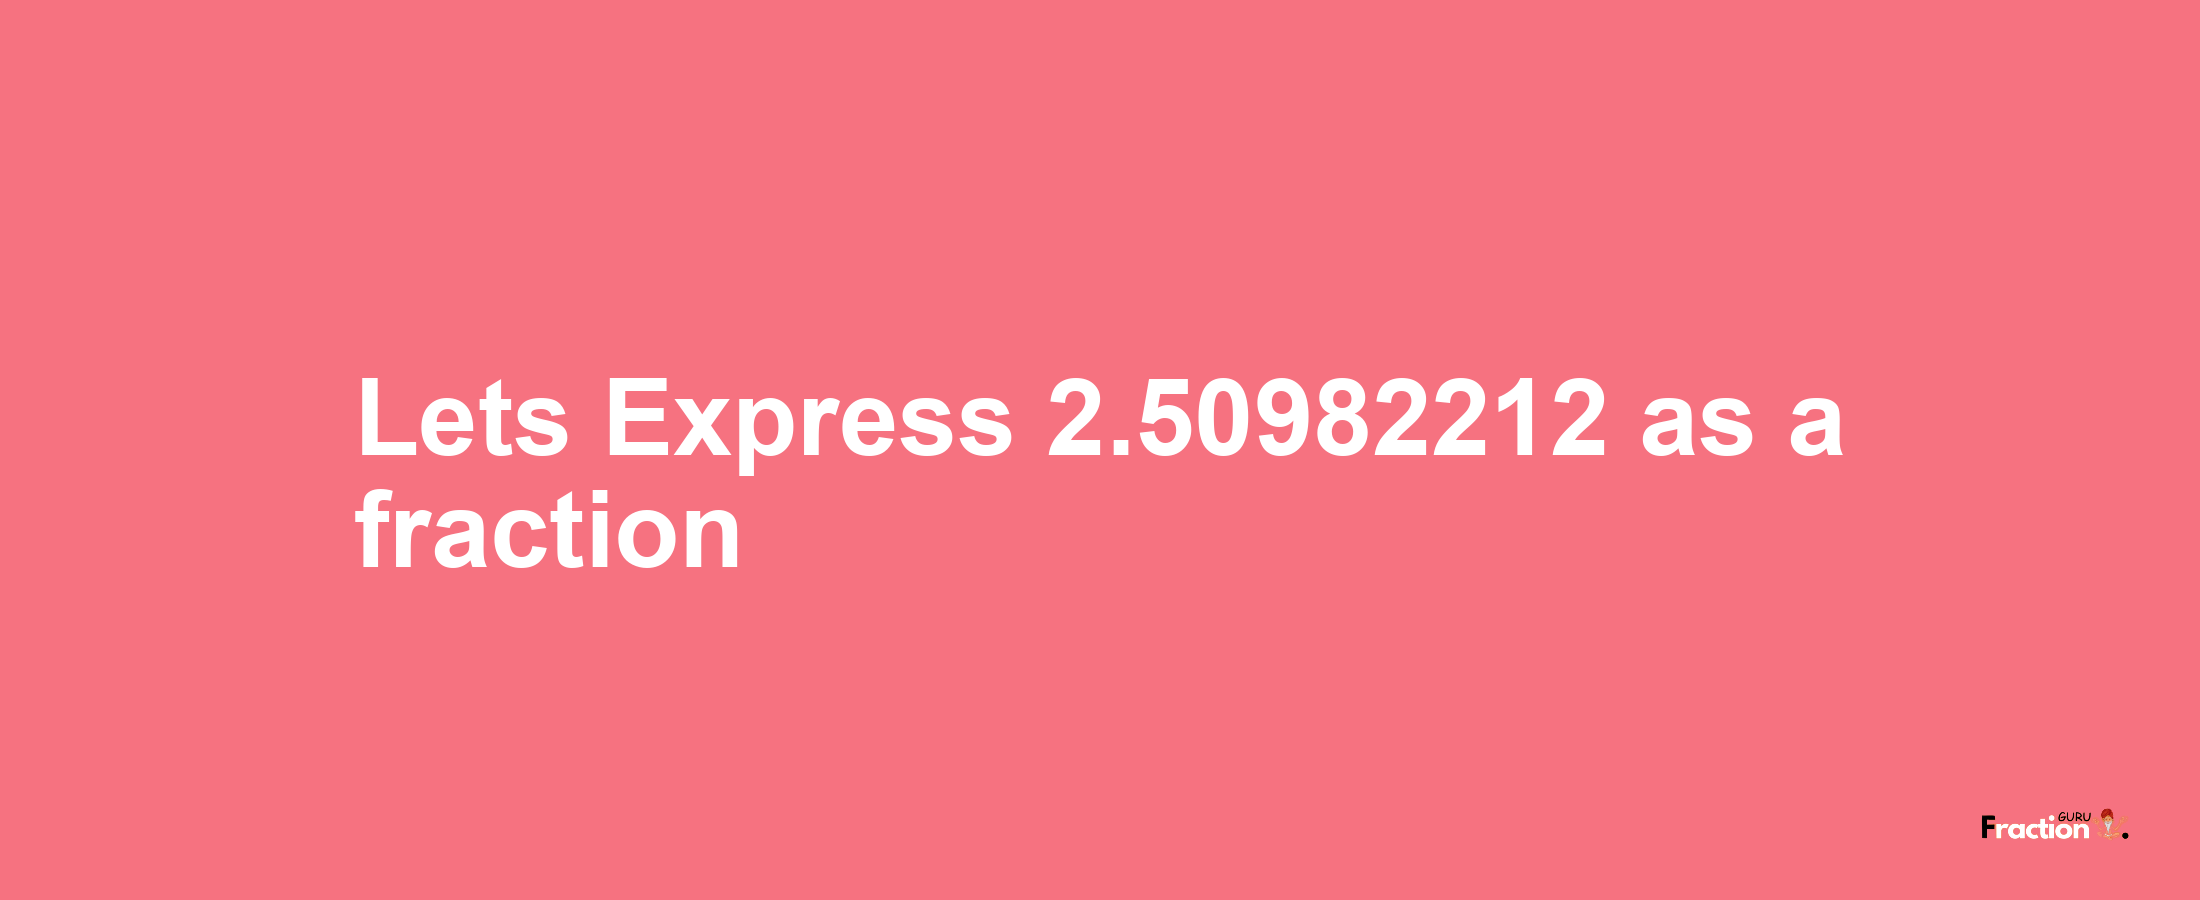 Lets Express 2.50982212 as afraction